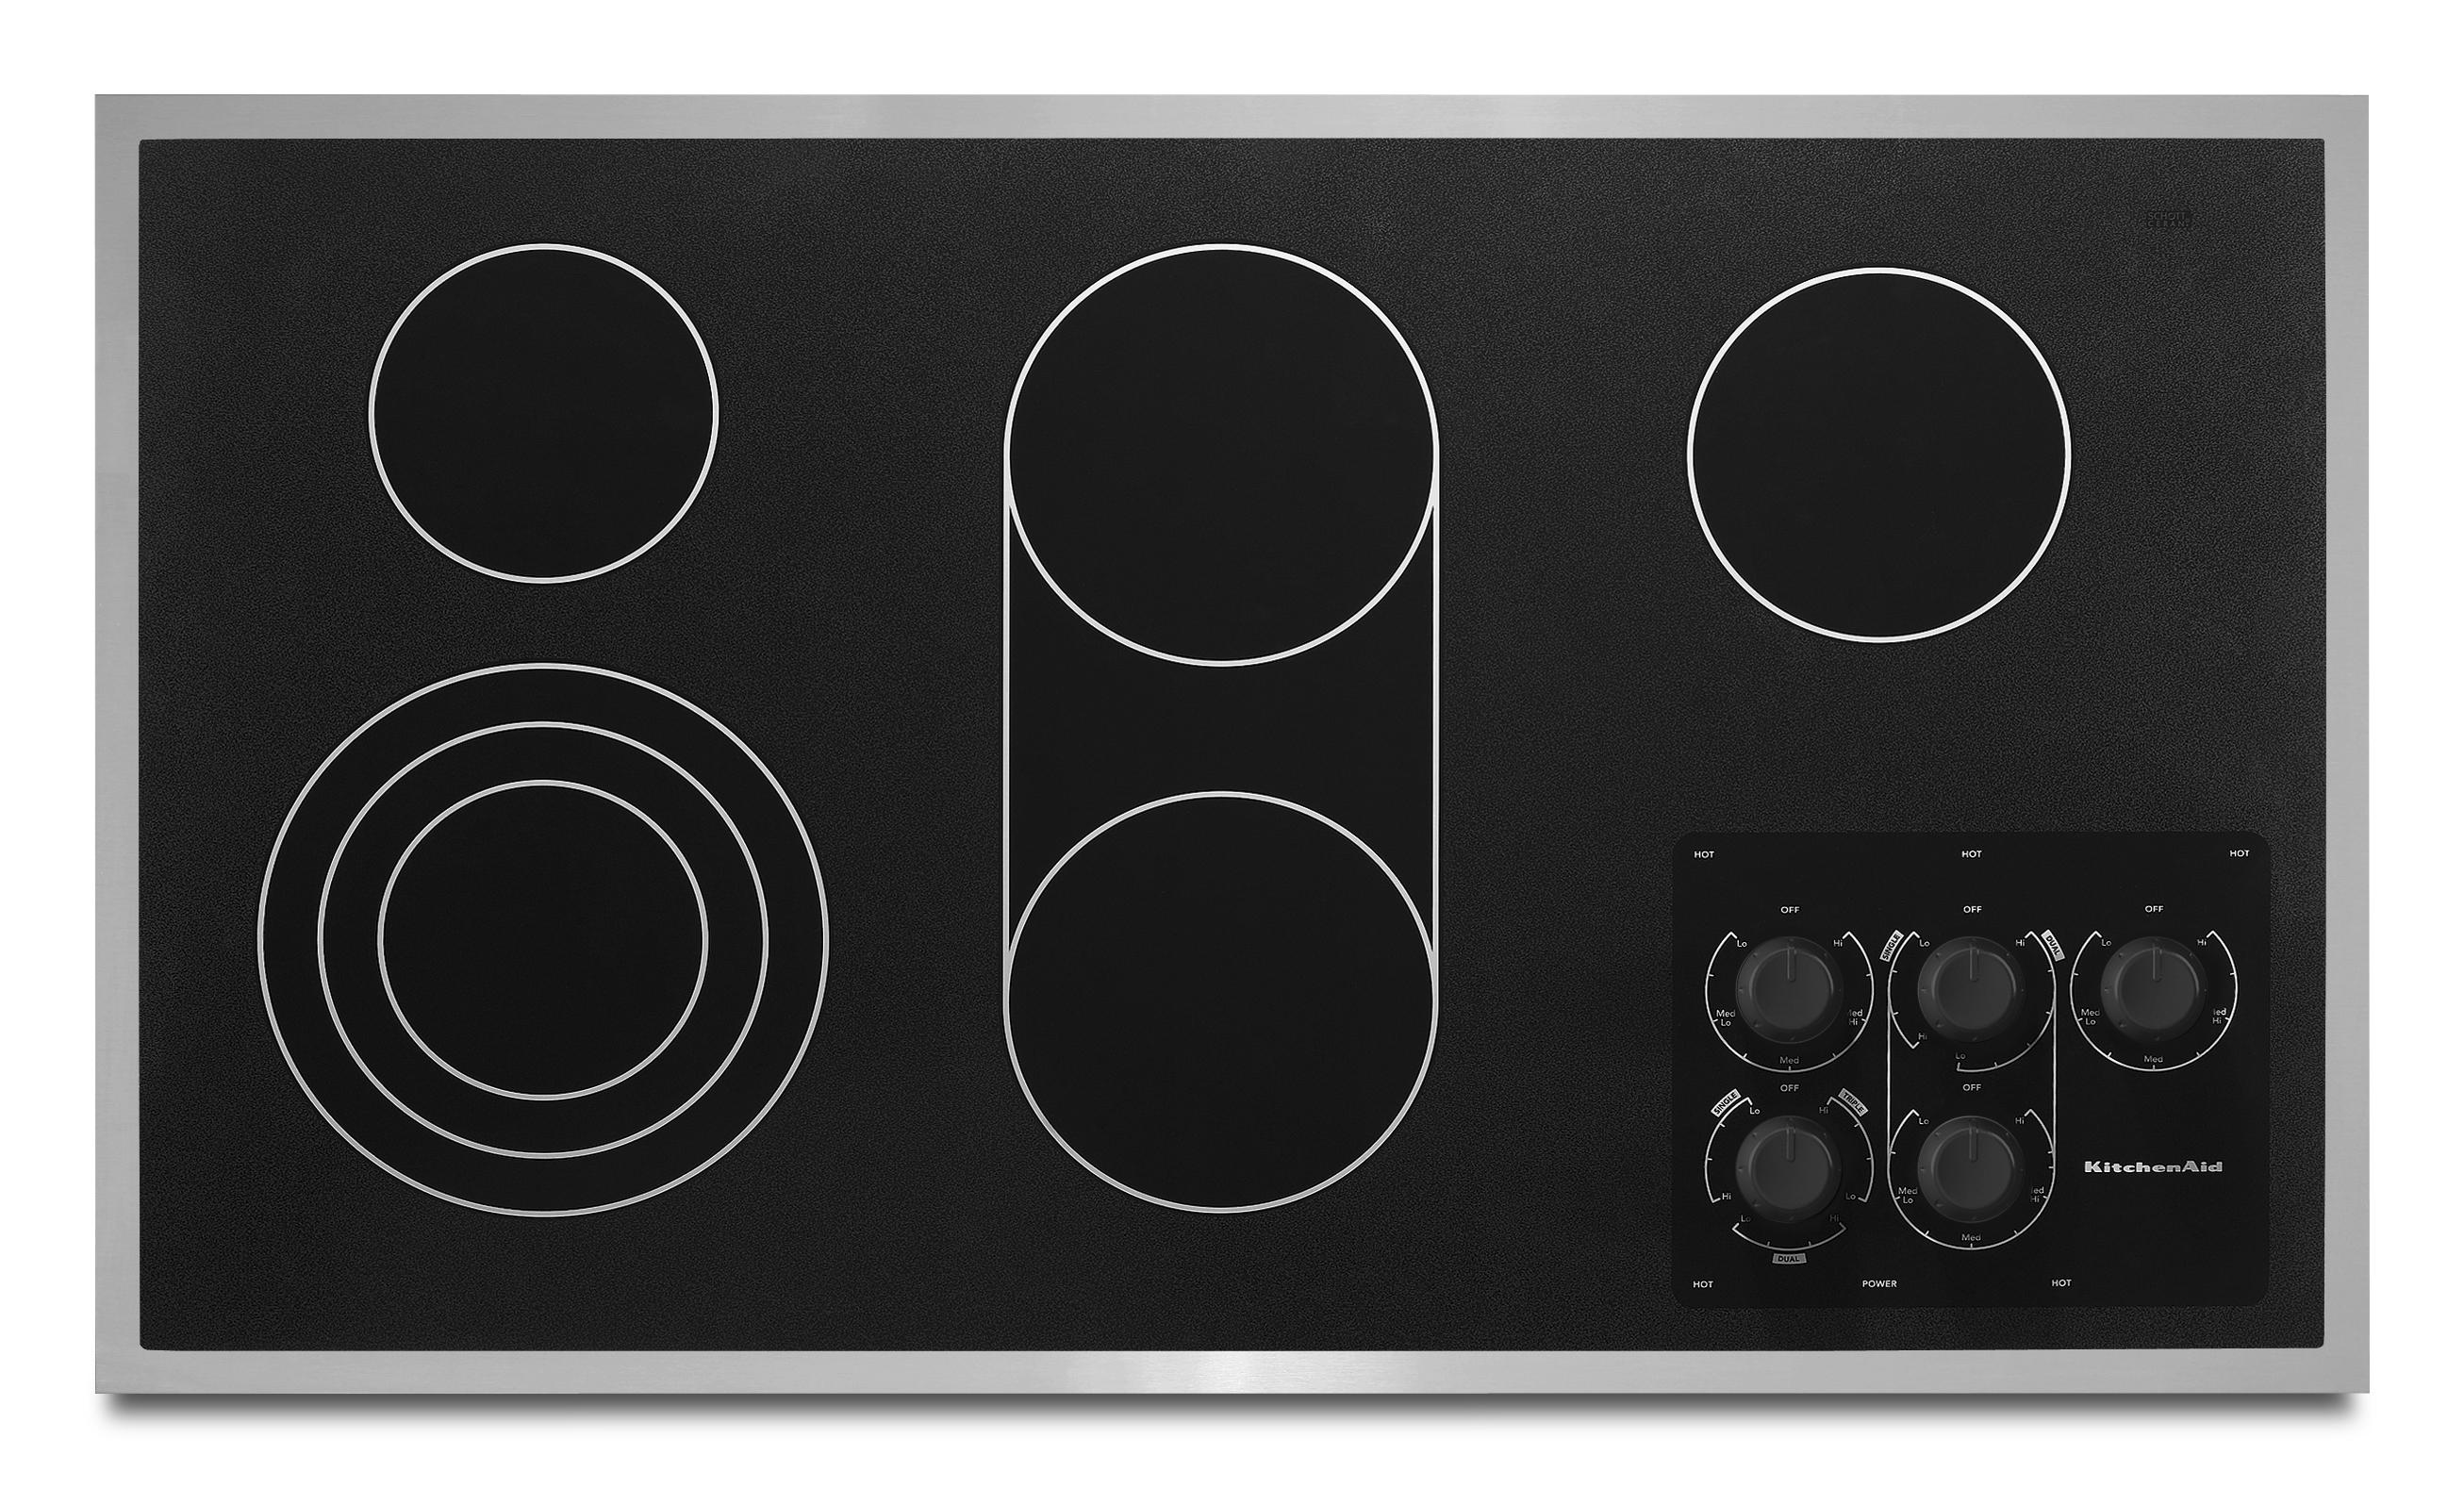 Kitchenaid KECC566RSS 36" Smoothtop Electric Cooktop with 5 Heating Elements, Traditional Black